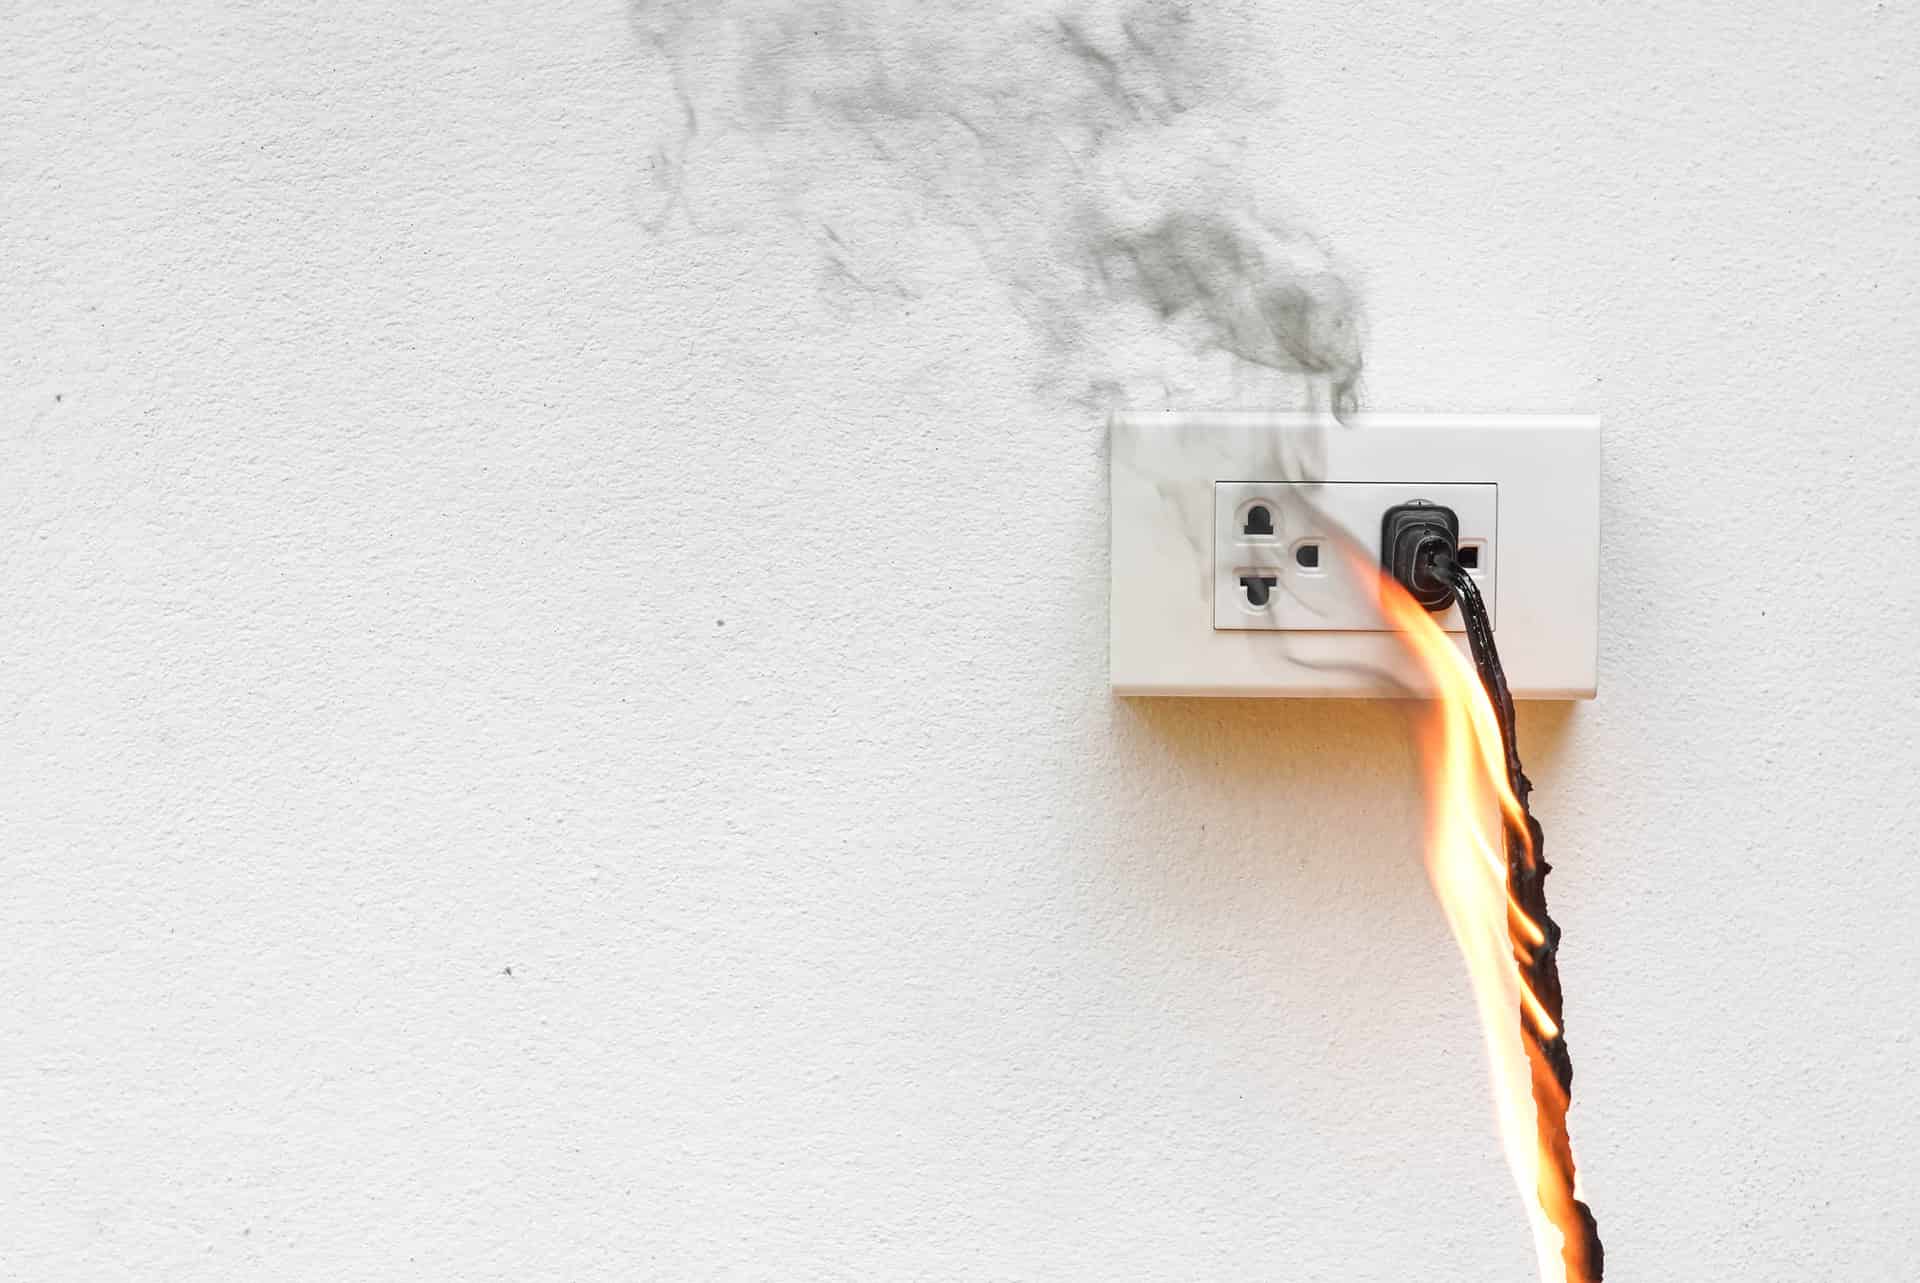 How Do Electrical Fires Start?